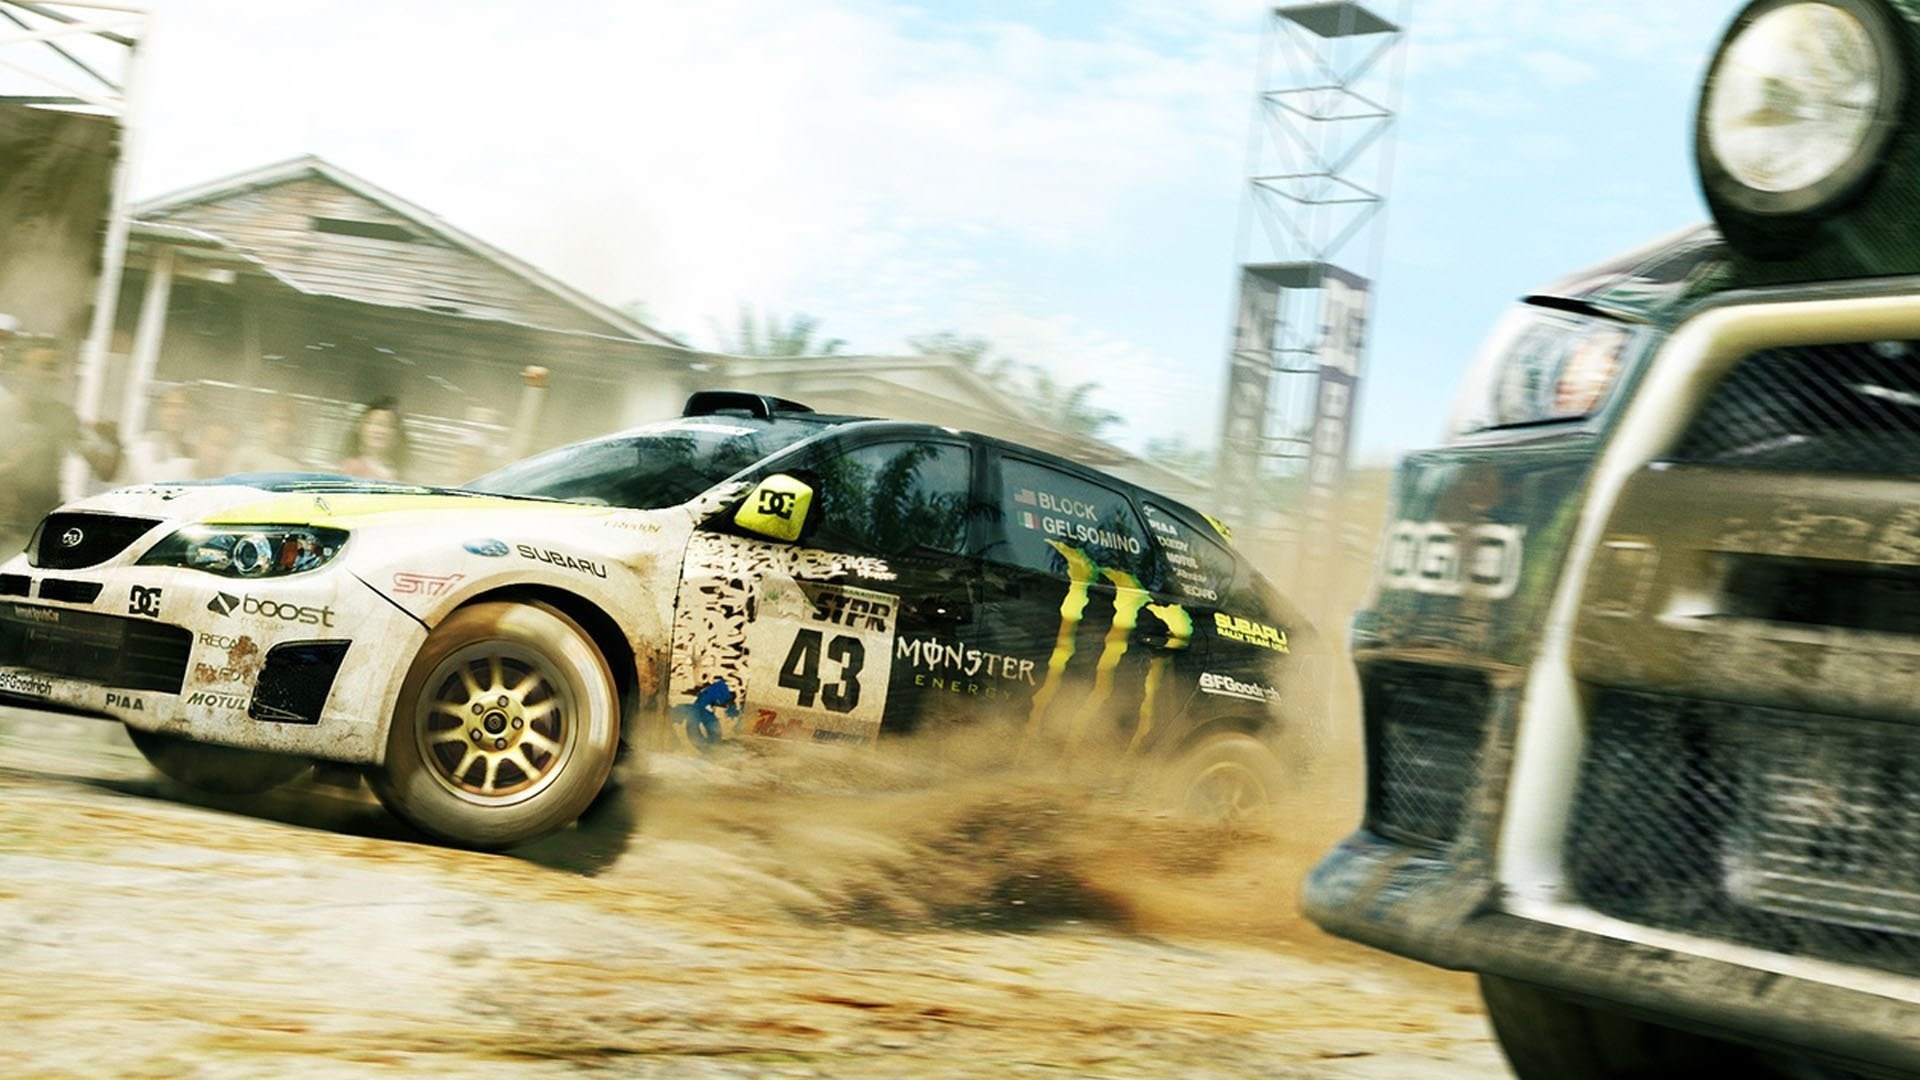 1920x1080 Backgrounds In High Quality - colin mcrae dirt 2 image by Araminta Hardman  (2017-